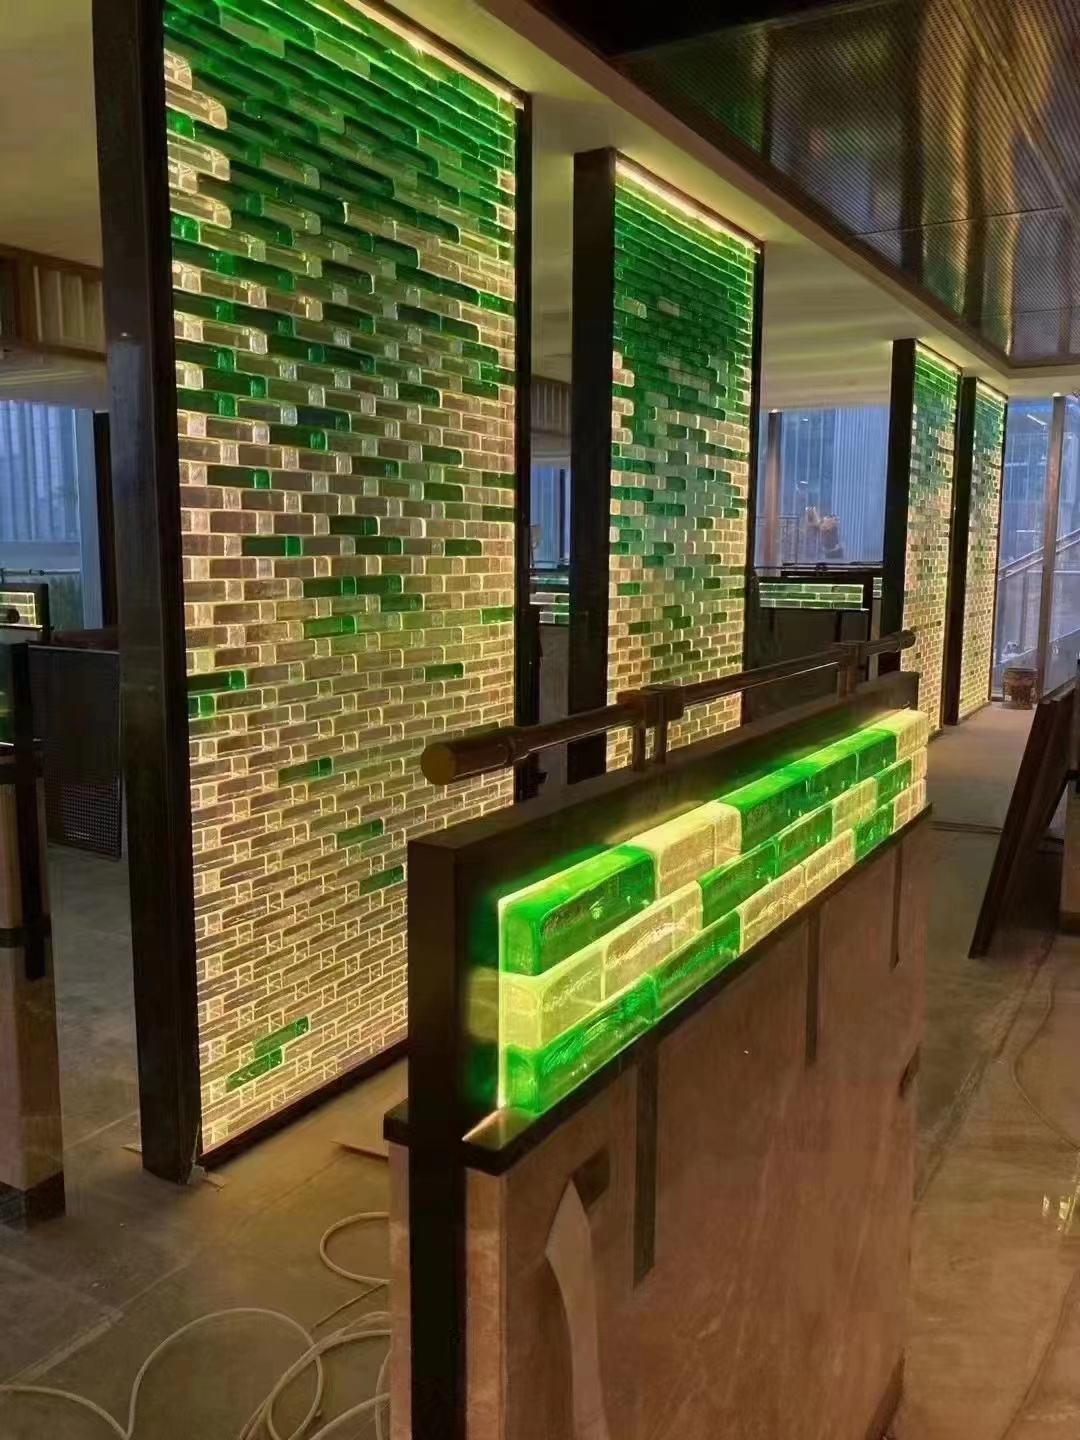 What does the advantage of glass brick have?